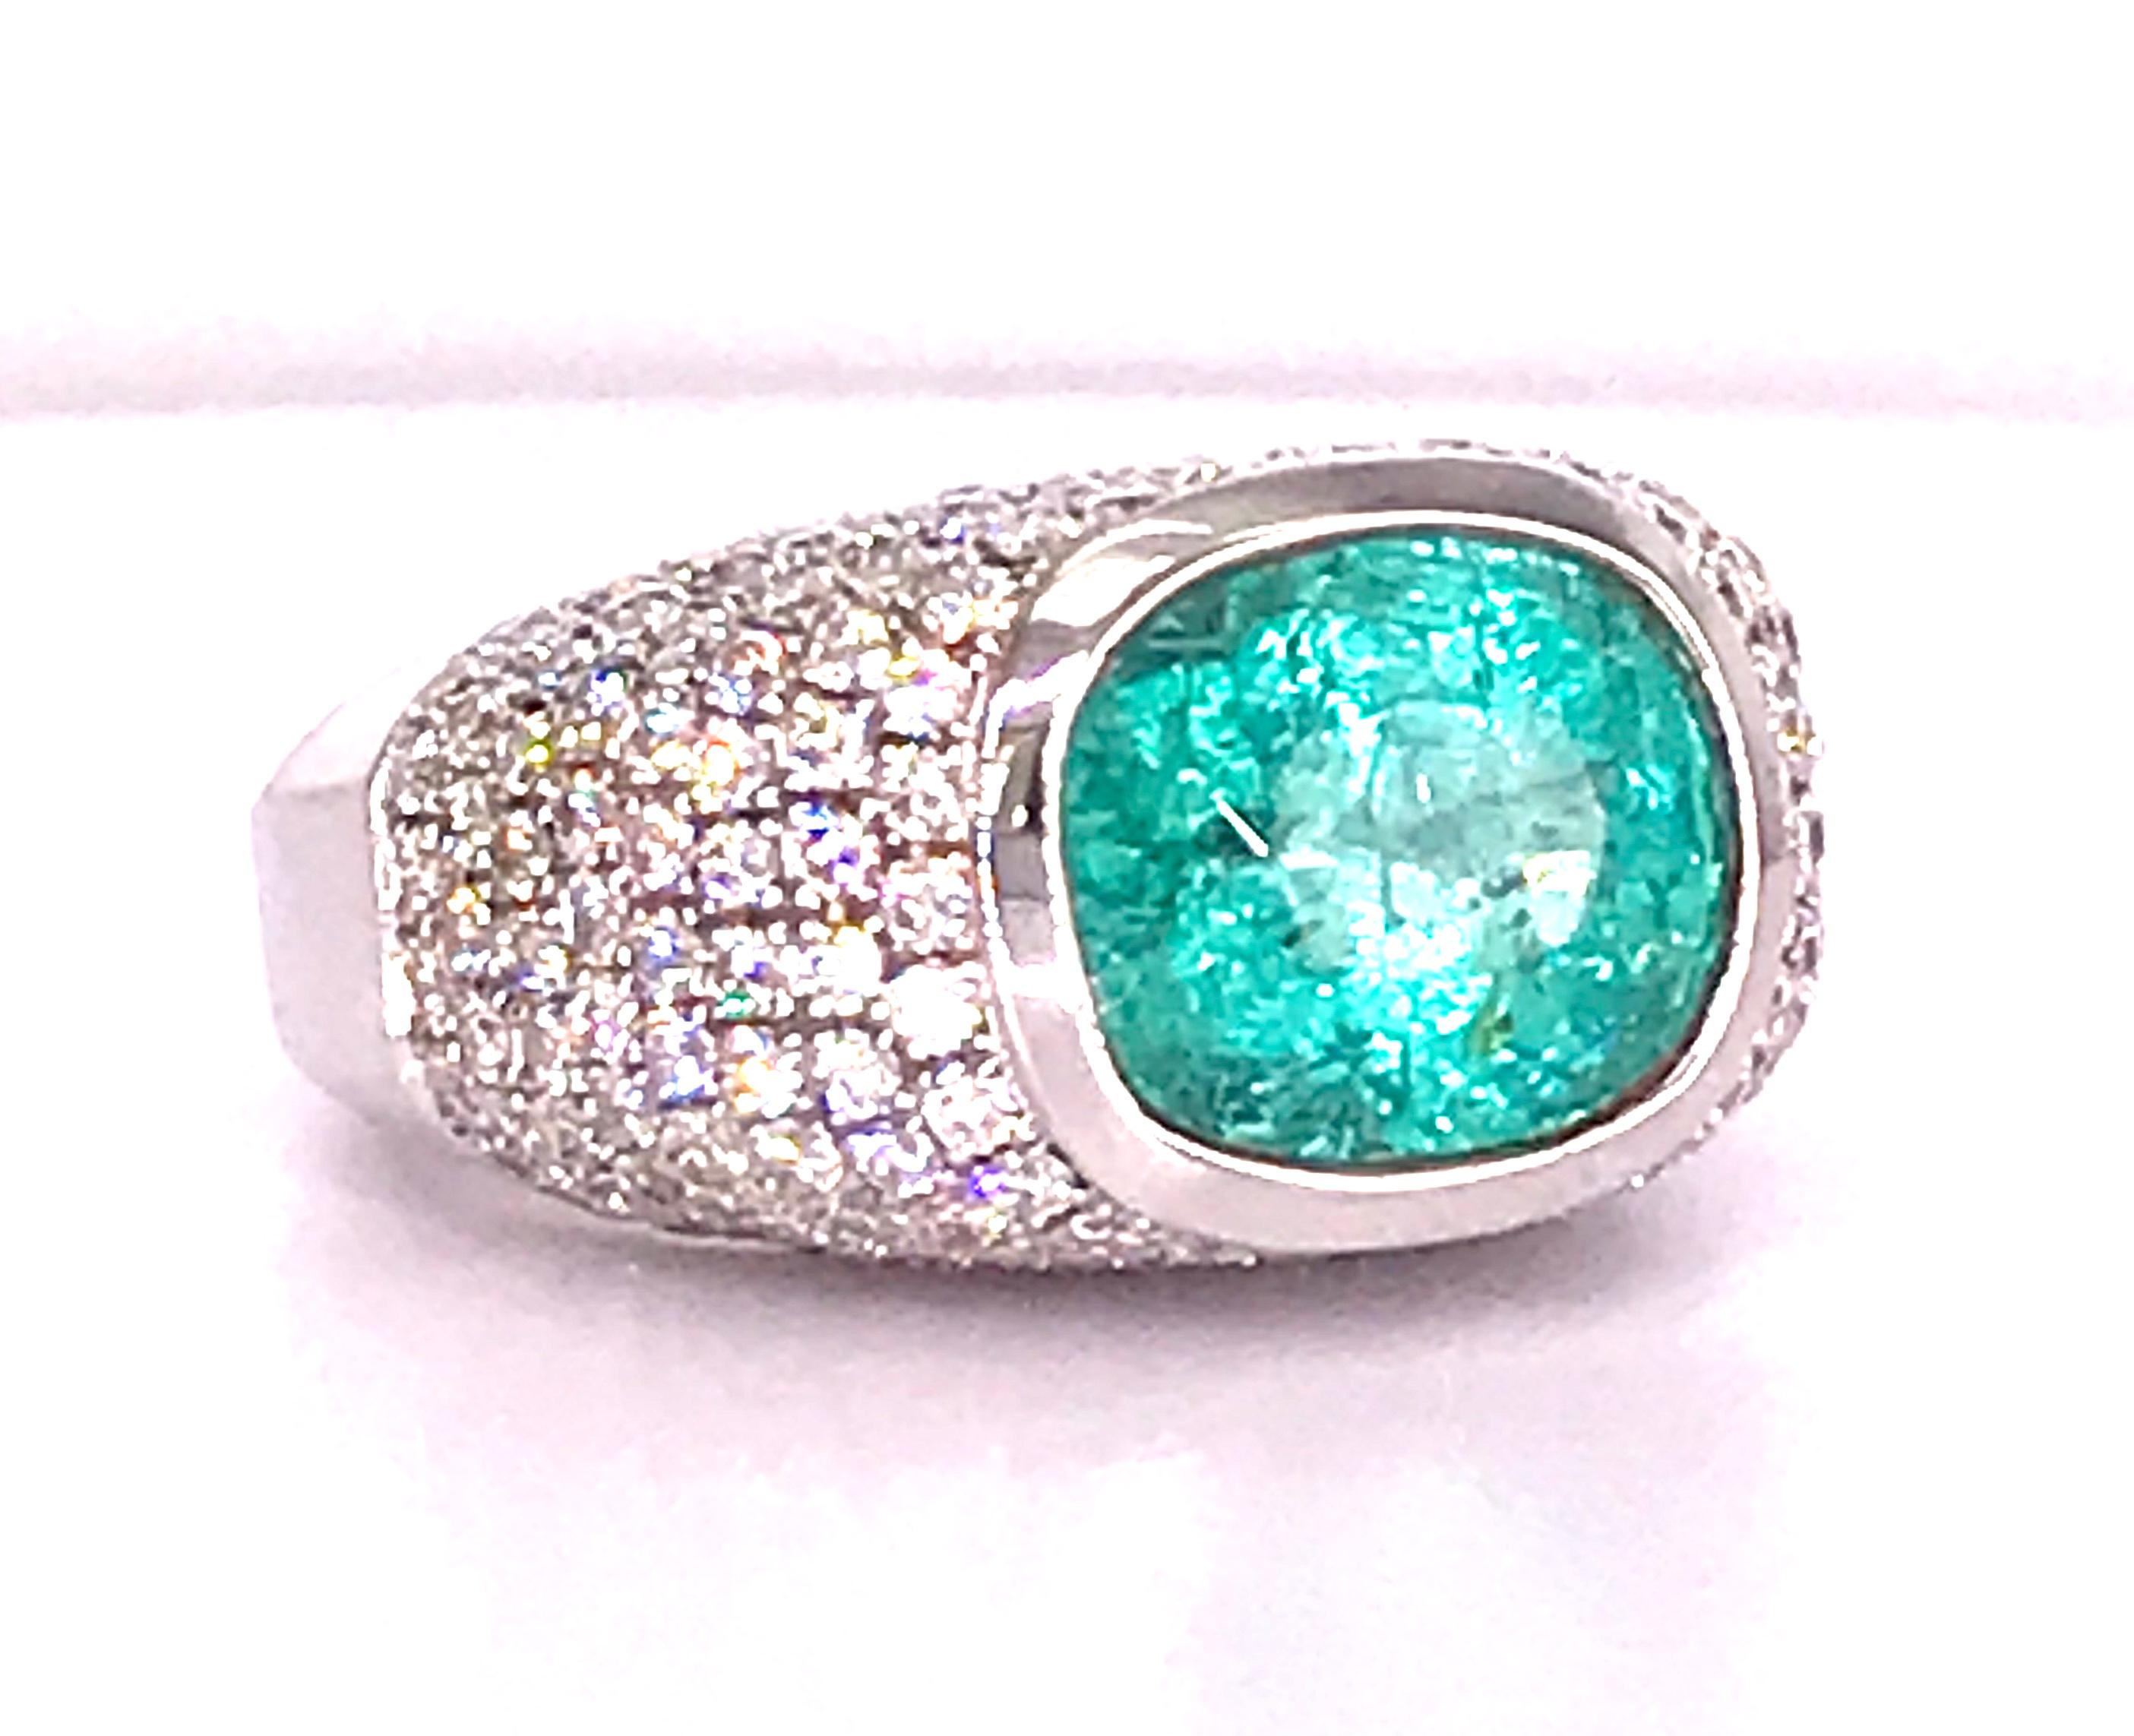 This rare Neon Blue 5.20 Carat Paraiba Tourmaline is set in white gold (14 Karat for its strength) and surrounded by 3 Carats of diamonds. The center gem measures 12.20 x 10.40 x 8.61 mm.